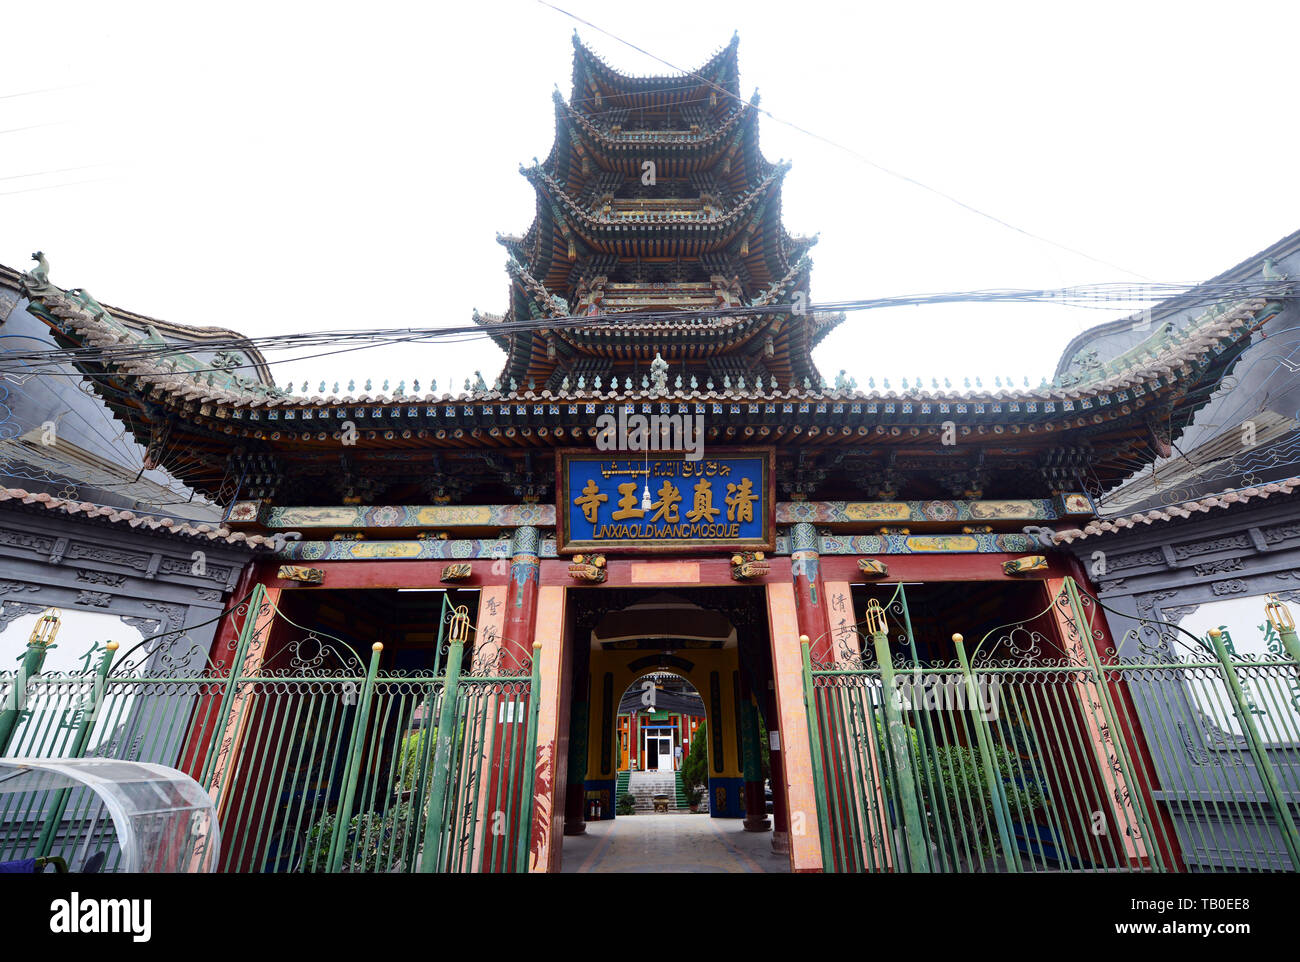 The old mosque in Linxia built in traditional Chinese architecture style. Stock Photo